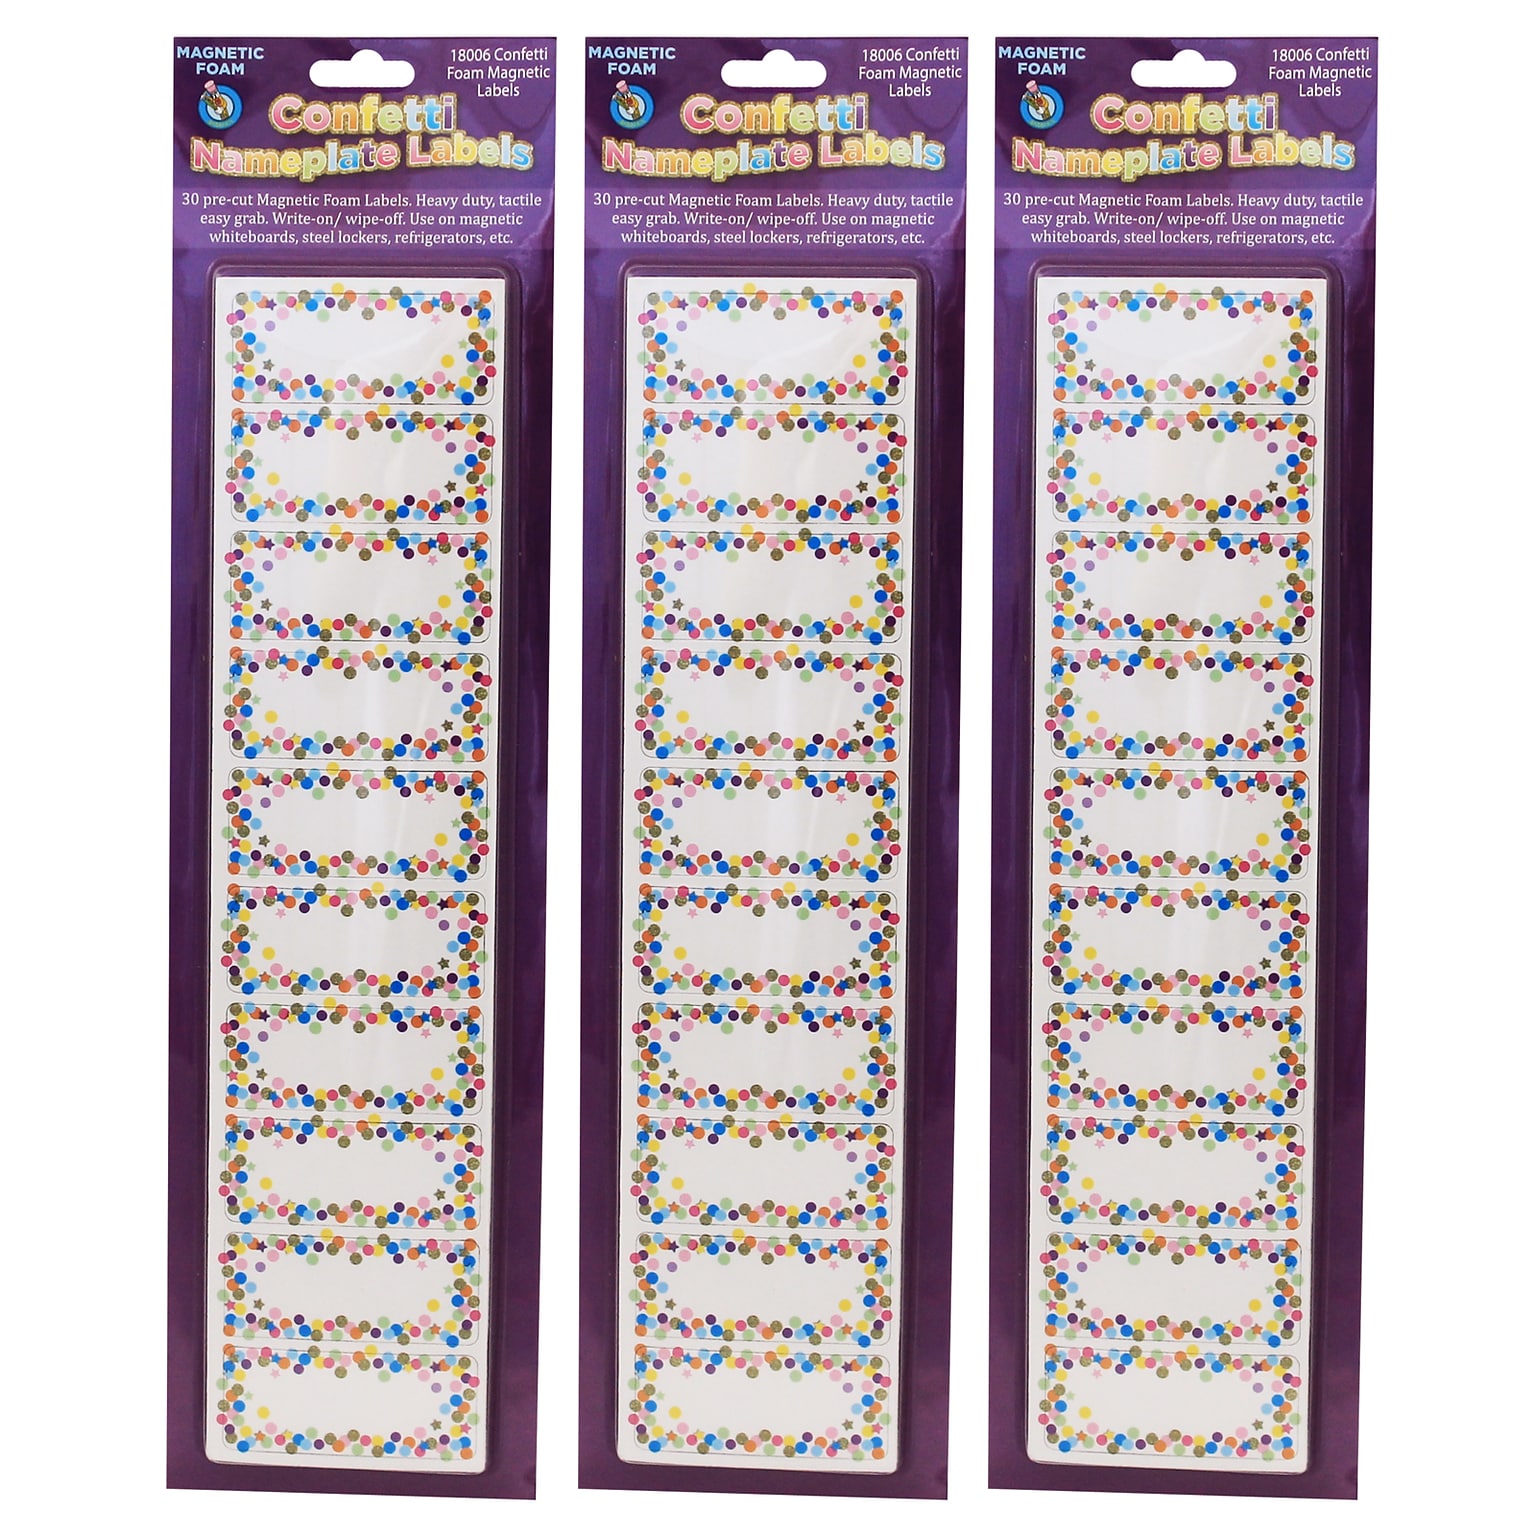 Ashley Productions Die-Cut Magnetic Confetti Nameplates, 2.5 x 1, 30 Per Pack, 3 Packs (ASH18006-3)